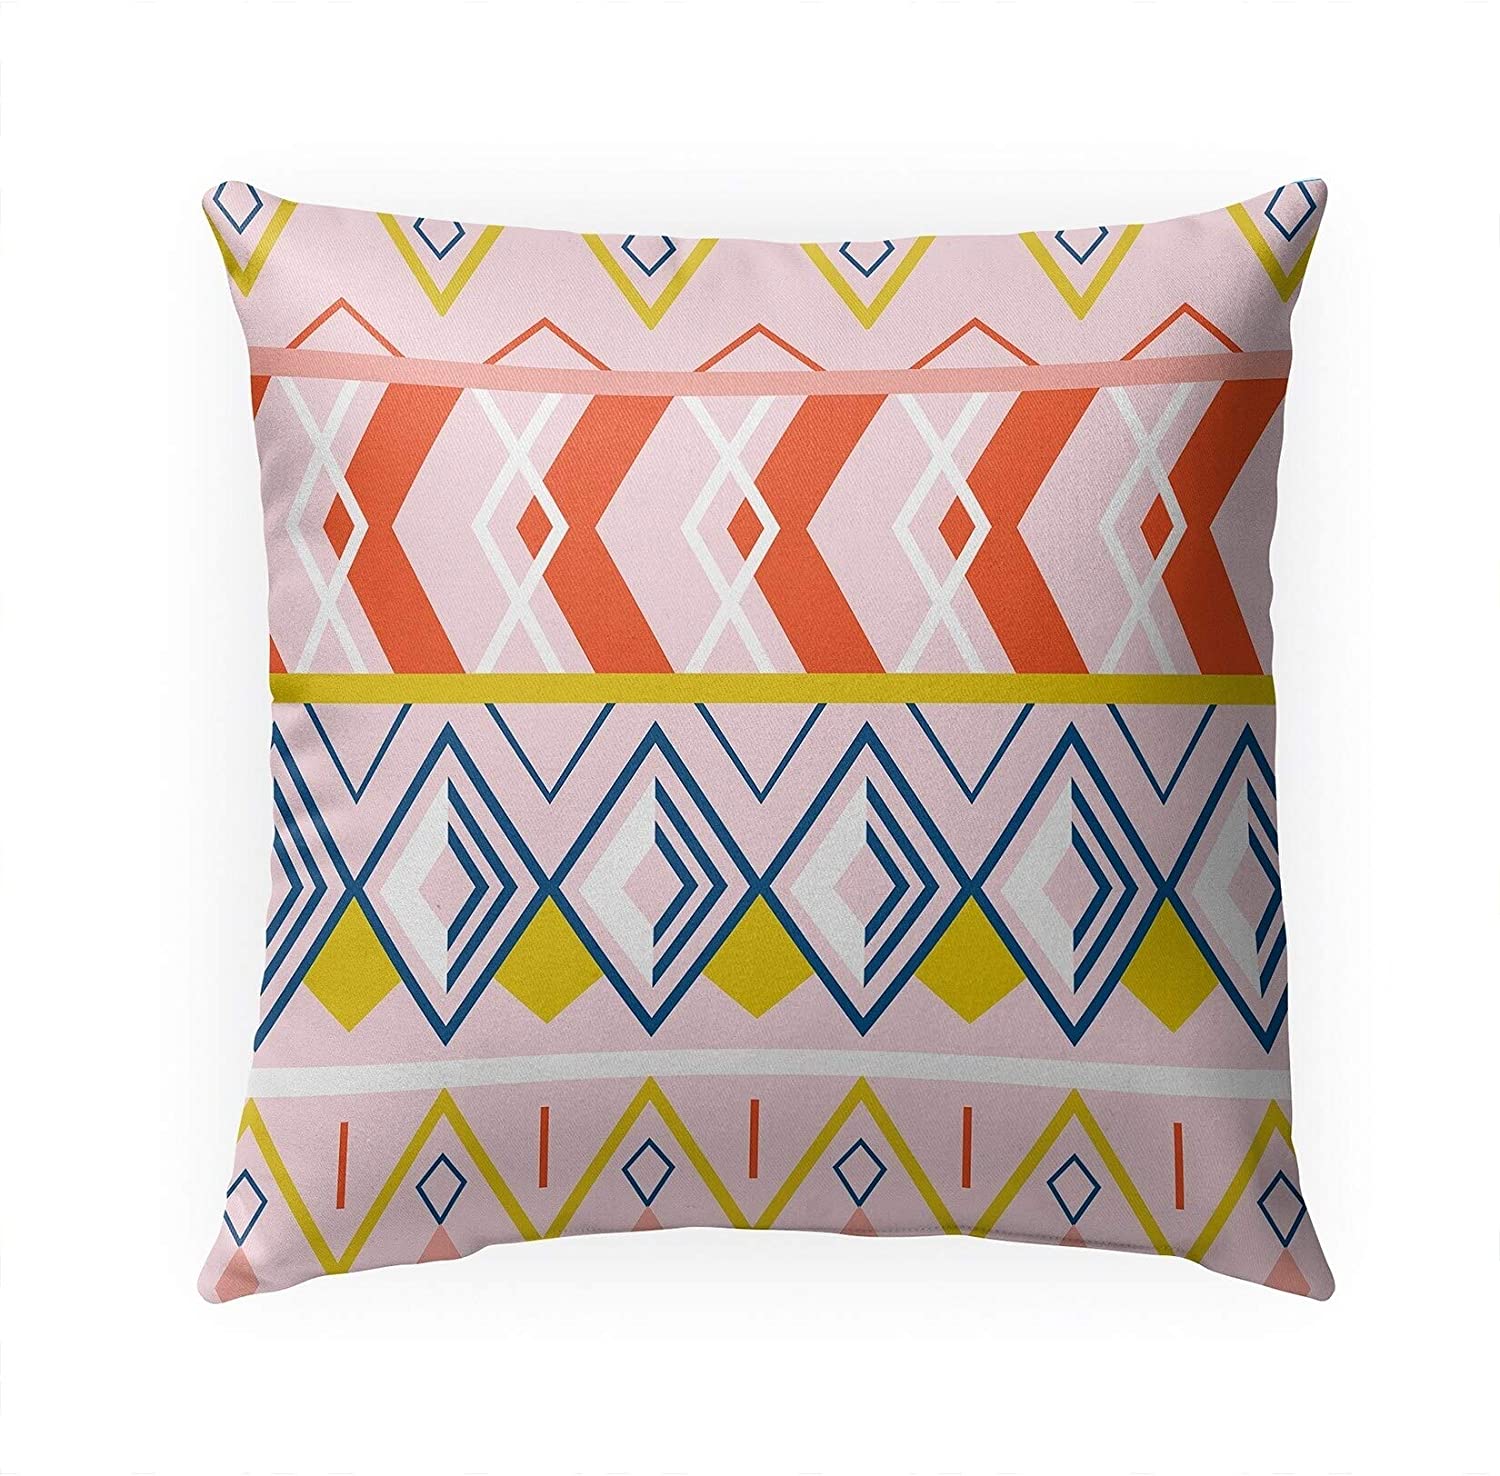 MISC Diamond Pink Indoor|Outdoor Pillow by Chi Hey Lee 18x18 Pink Geometric Southwestern Polyester Removable Cover